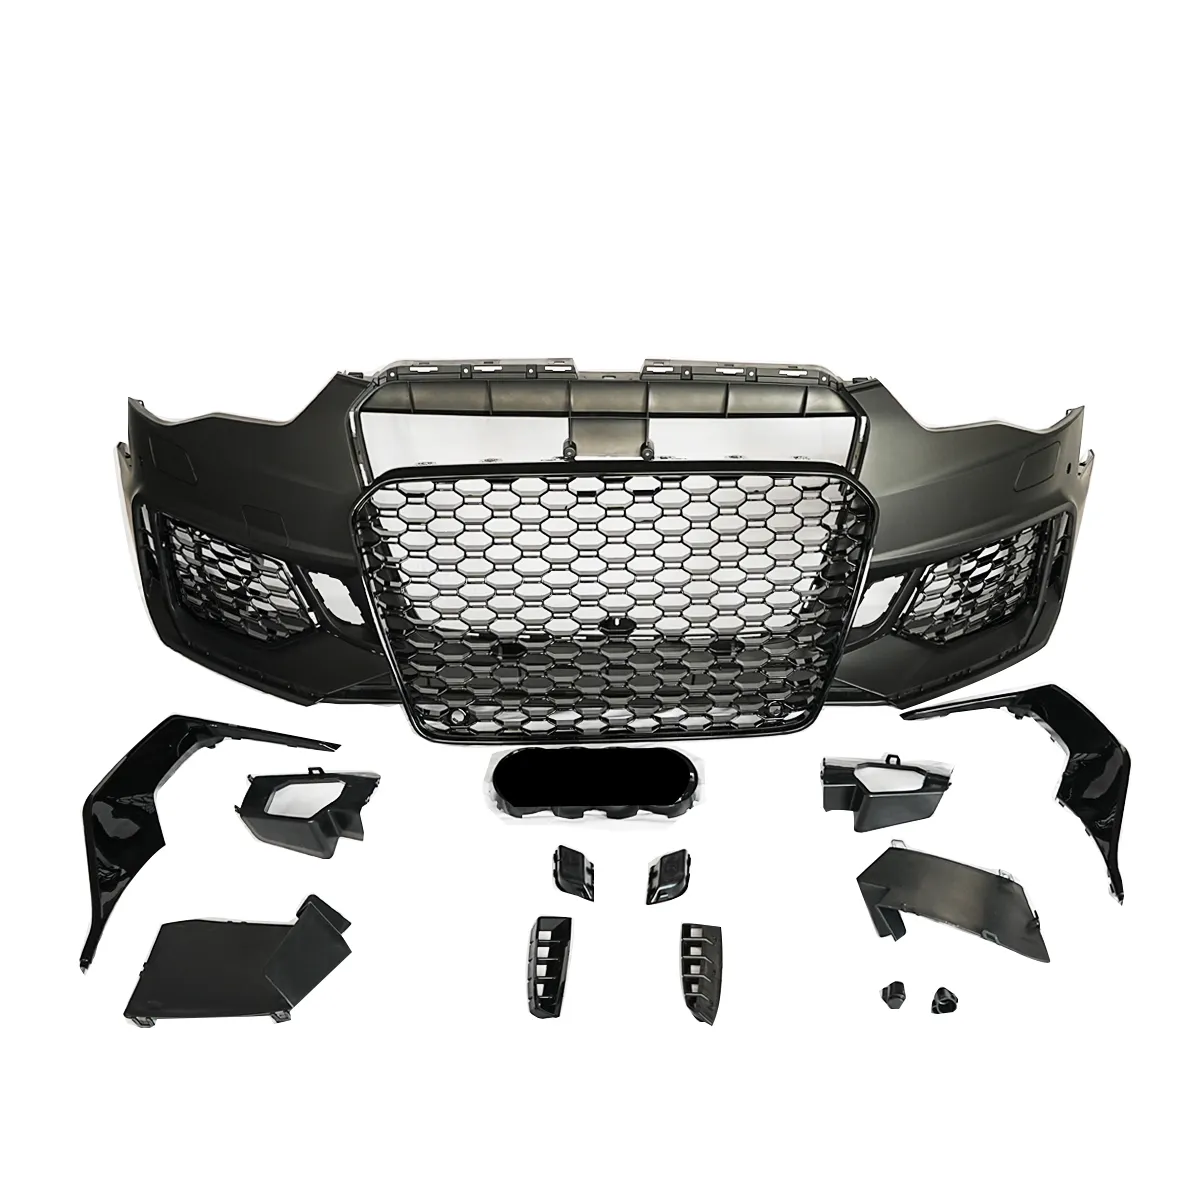 RS5 B9 Front bumper with grill for Audi A5 S5 B8.5 facelift RS5 bodykit bumper upgrade B9 style 2012 2013 2014 2015 2016